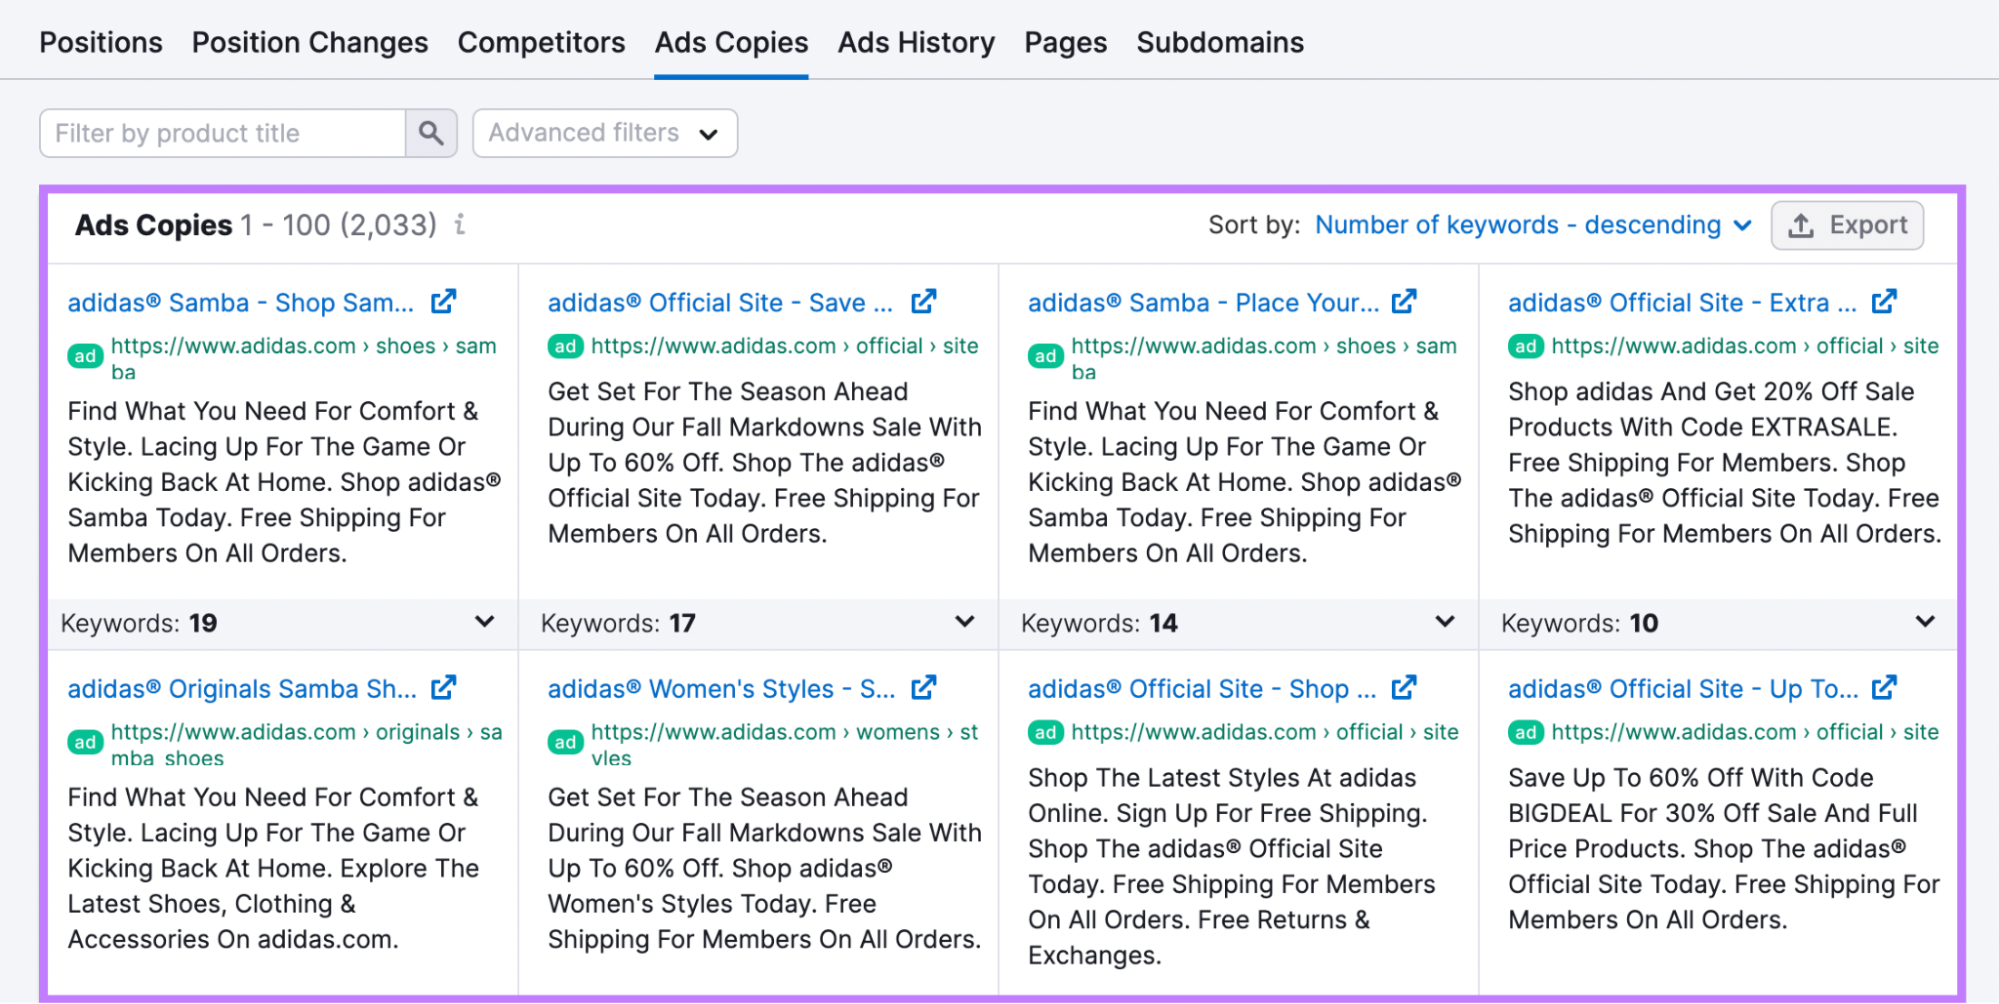 "Ads Copies" table in Advertising Research shows your competitors' ad copies